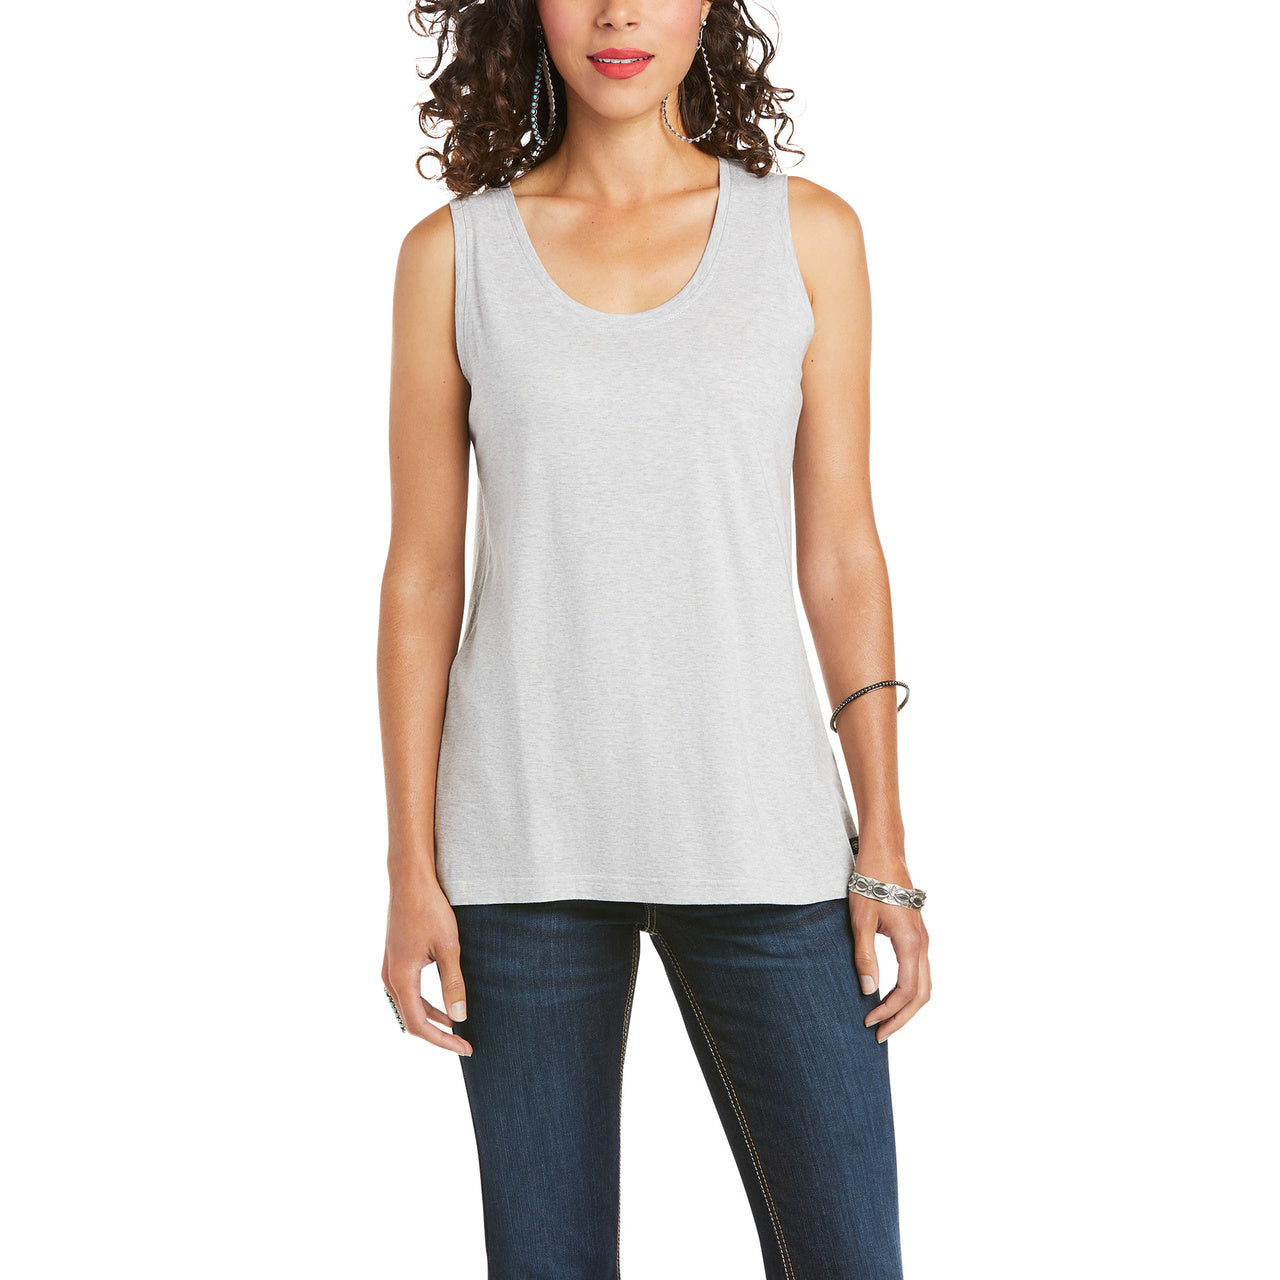 Load image into Gallery viewer, Ariat Ladies Element Heather Grey Tank Top Shirt 10035207
